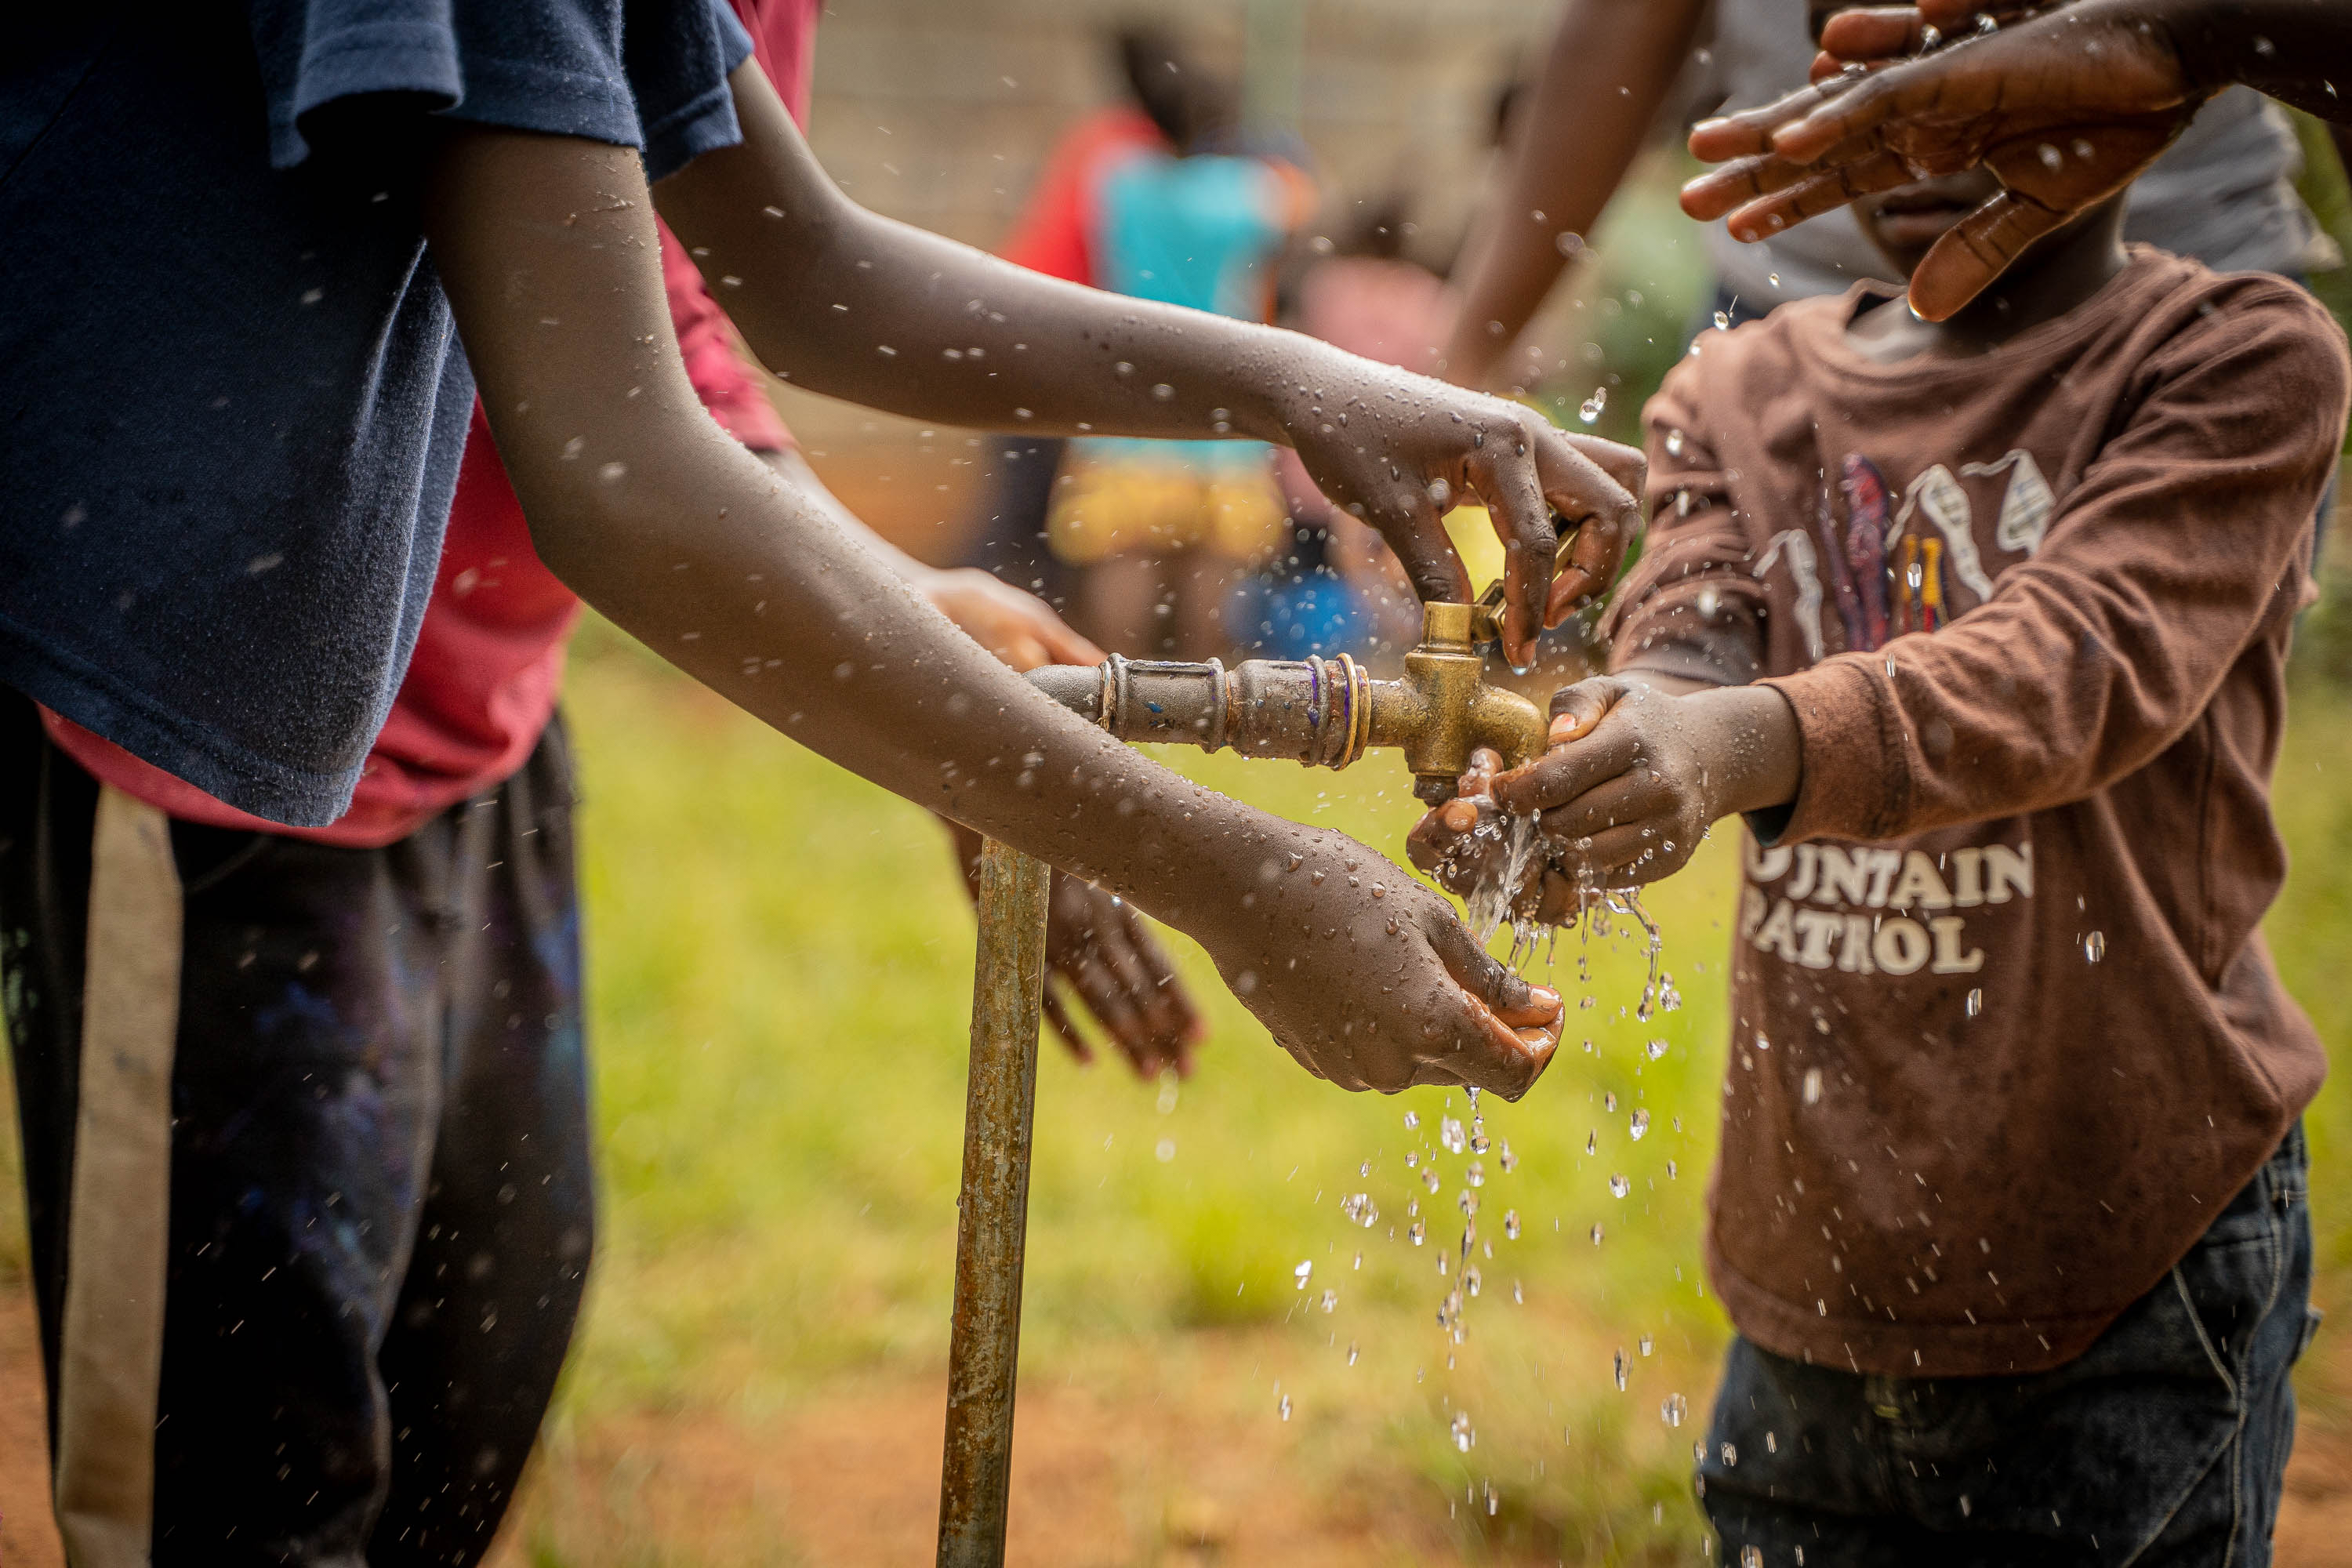 African children washing hands Photo by Well Aware